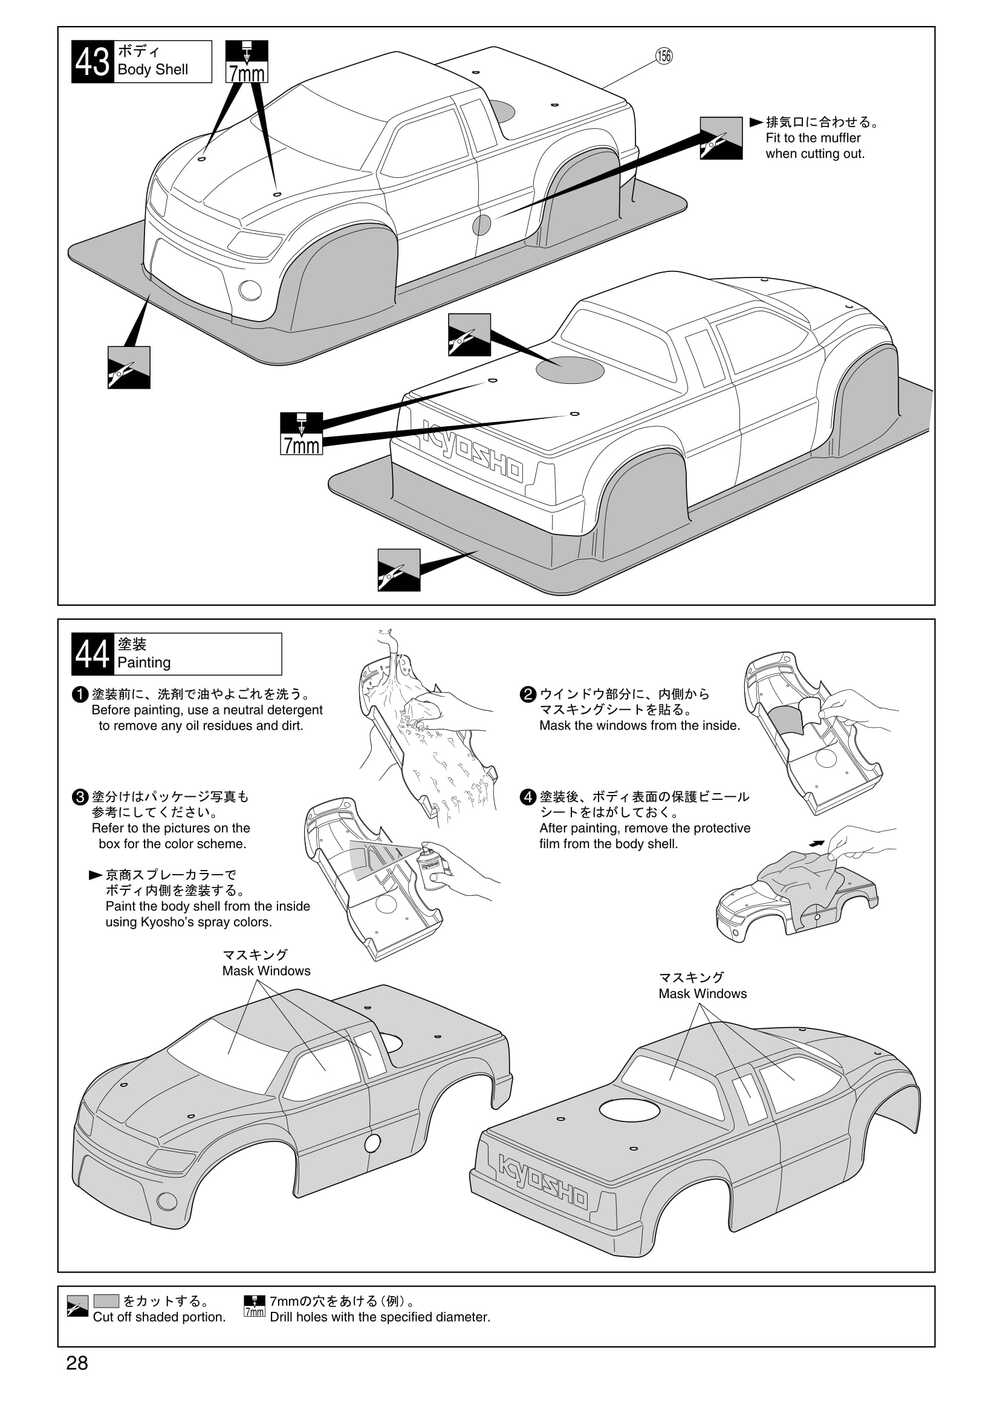 Kyosho - 31221 - Mad-Force - Manual - Page 28